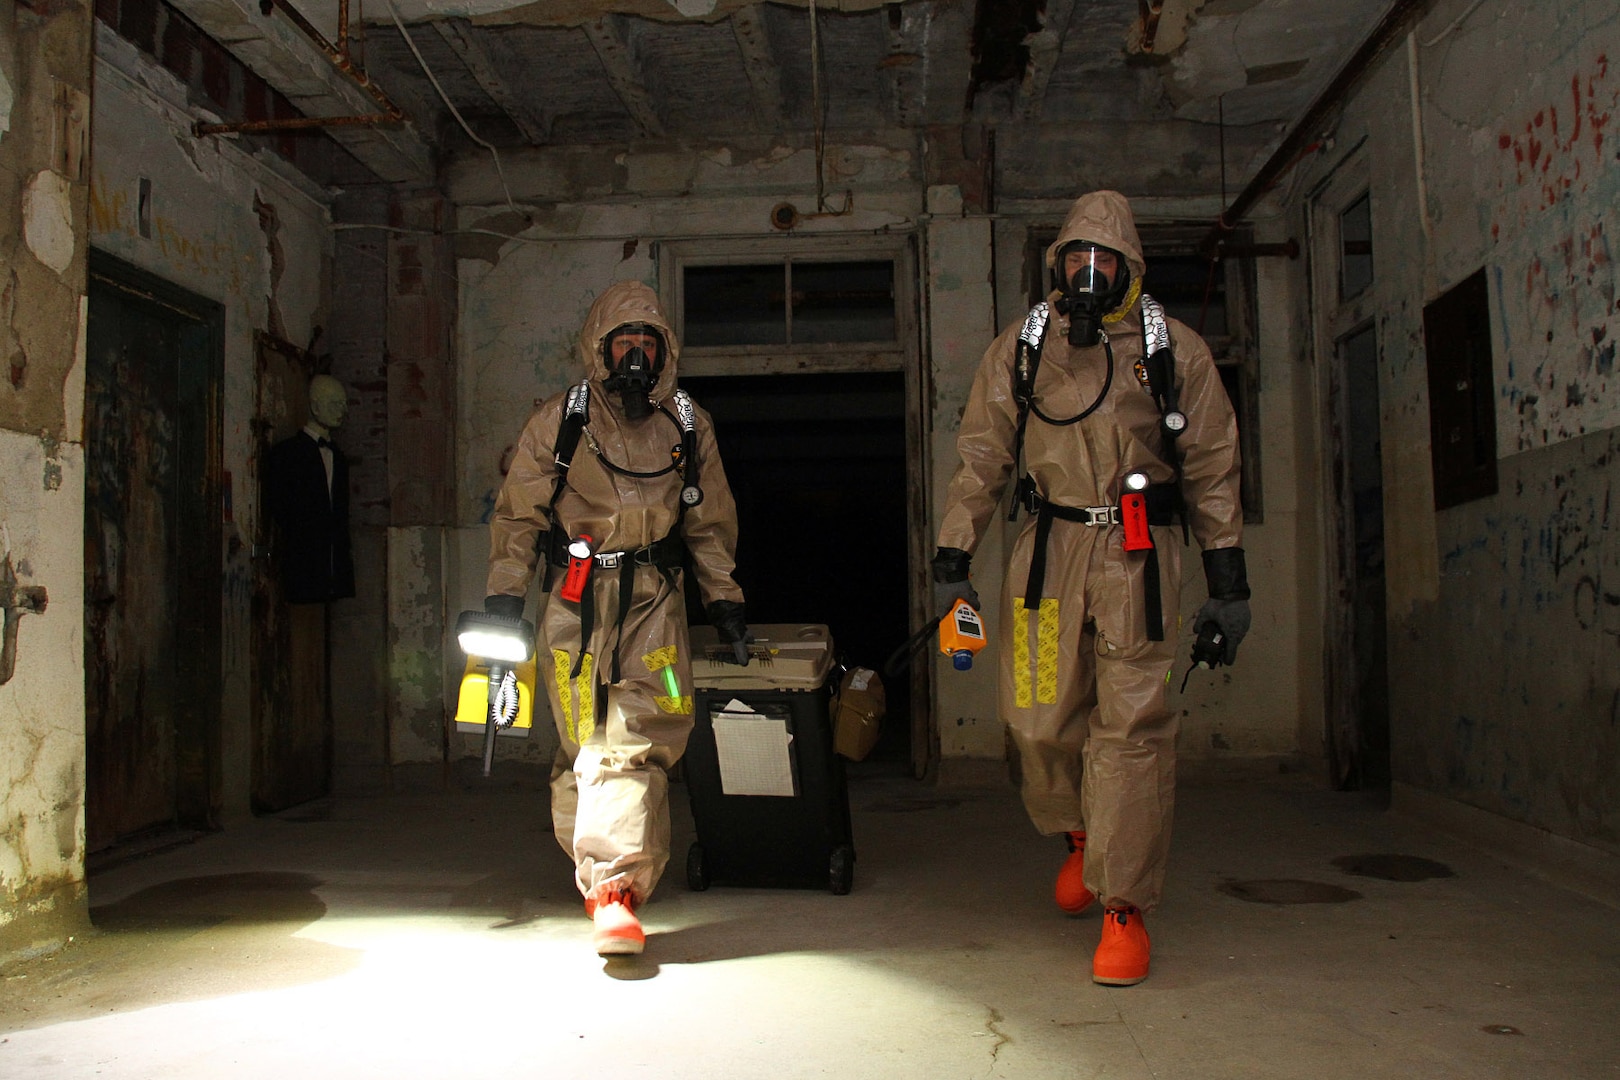 Staff Sgt. Patrick McCoy, left, and Sgt. Aaron Brady with the 41st Civil Support Team, search for a suspected biological threat during a hazardous materials exercise at the Waverly Hills Sanatorium in Louisville, Ky., Feb. 7, 2016. 